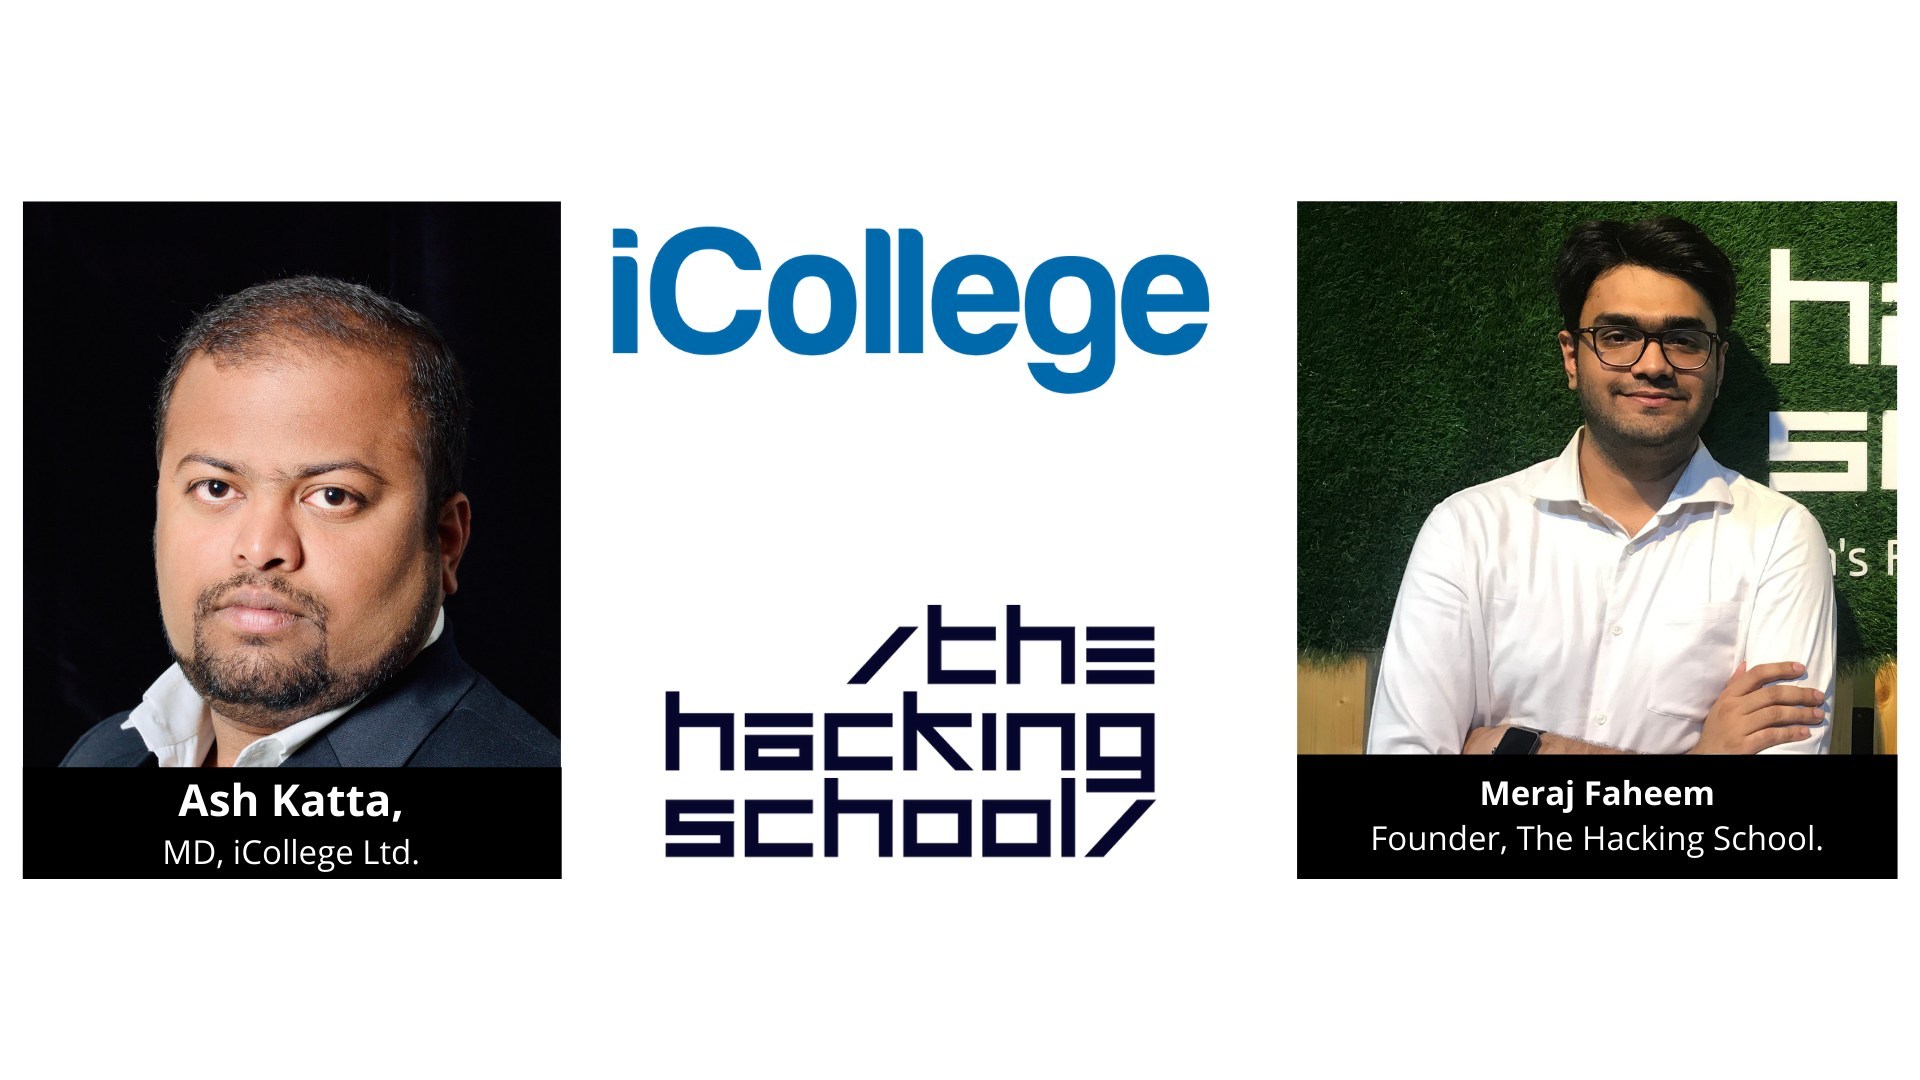 iCollege Australia acquires majority stake in Hyderabad based The Hacking School - India's first coding bootcamp